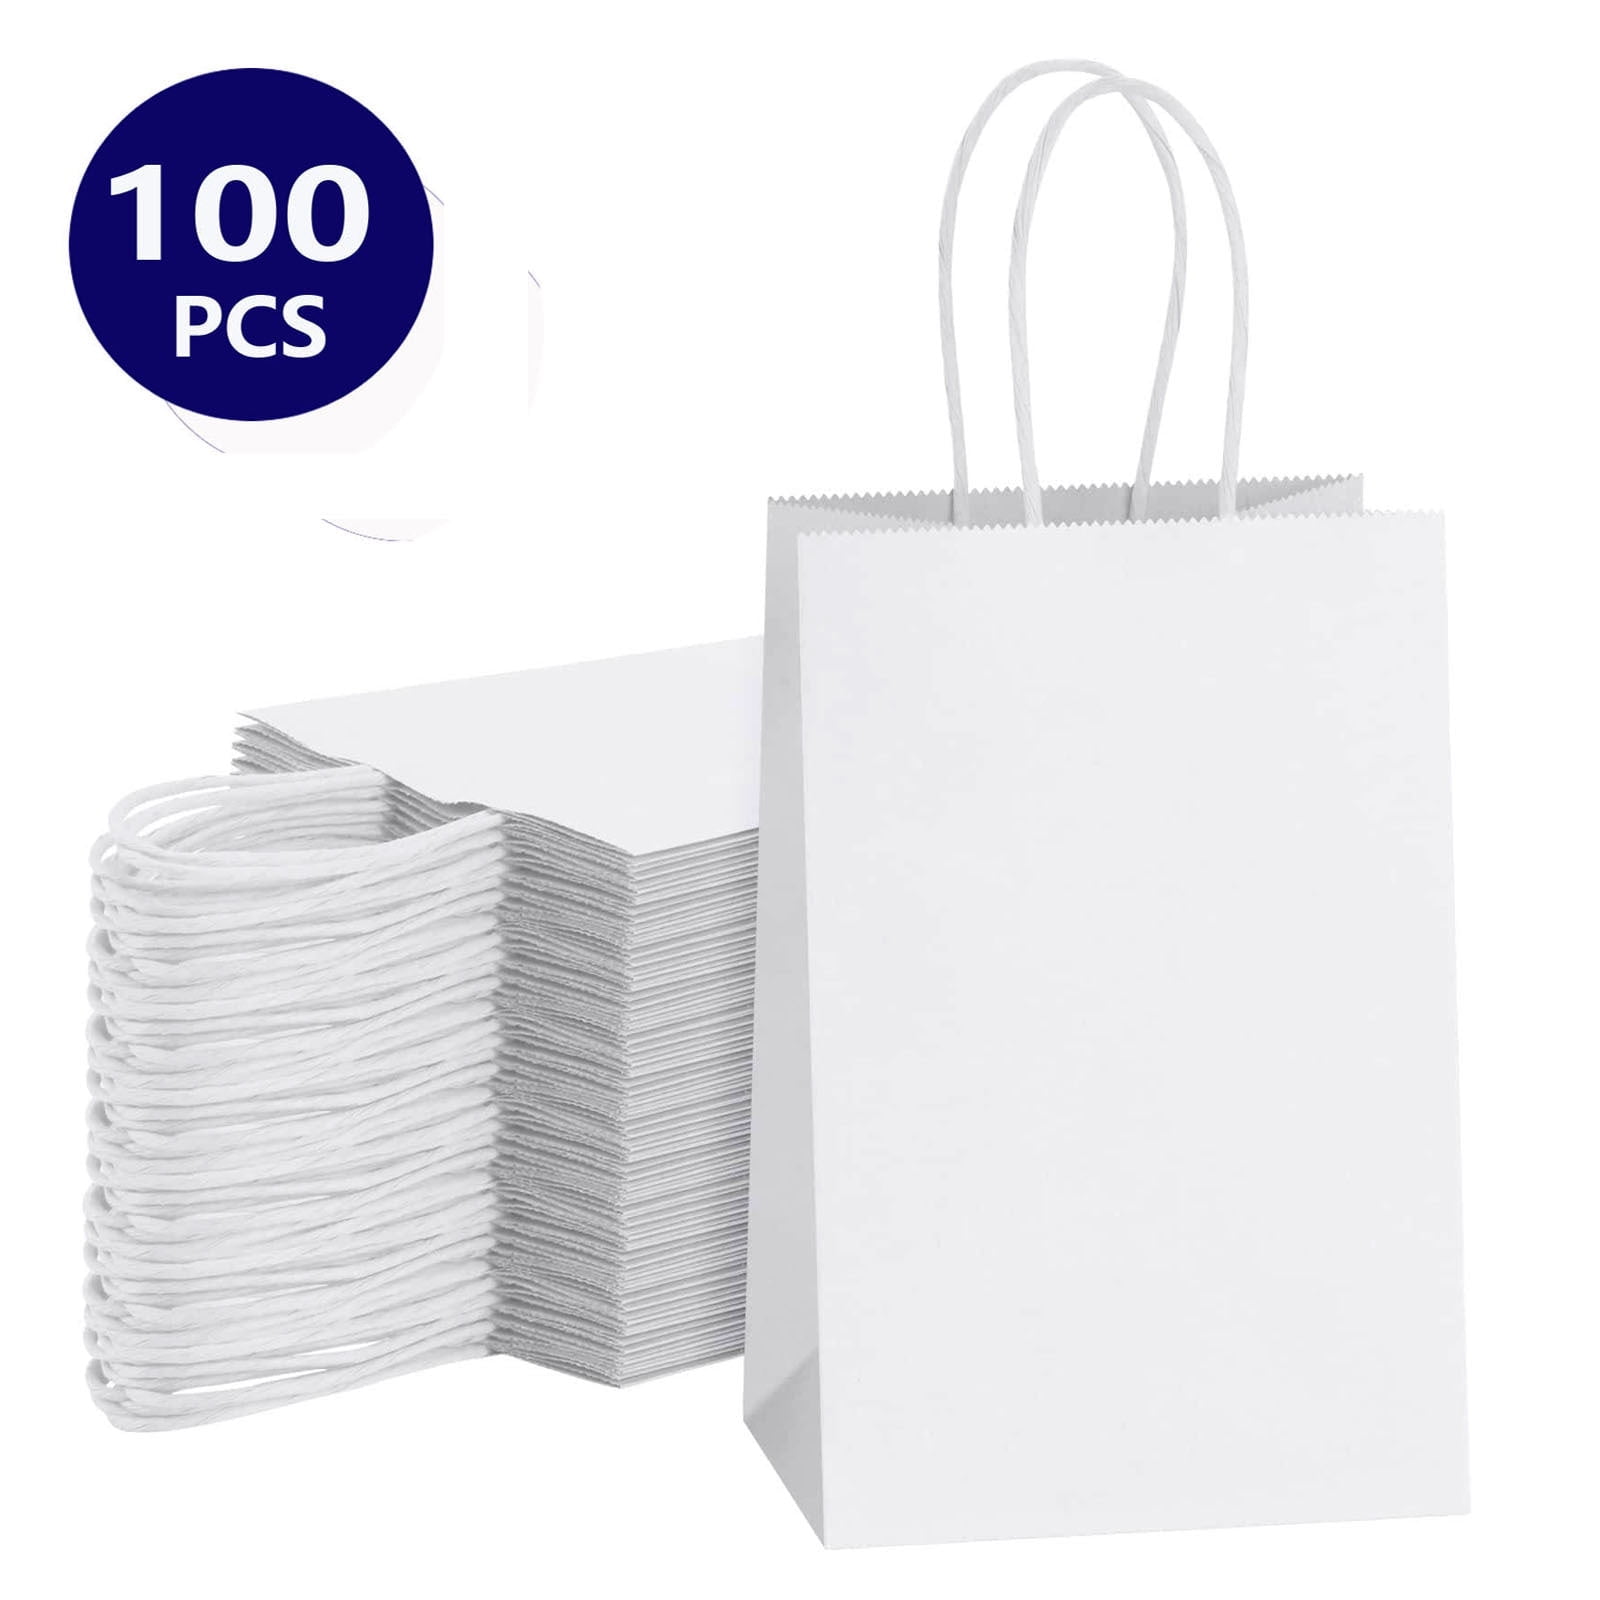 White Small Gift Bags with Tissue Paper, YACEYACE 10Pcs 5.25x3.75x8  Small White Paper Gift Bags with Handles Bulk,Baby Shower,Merchandises